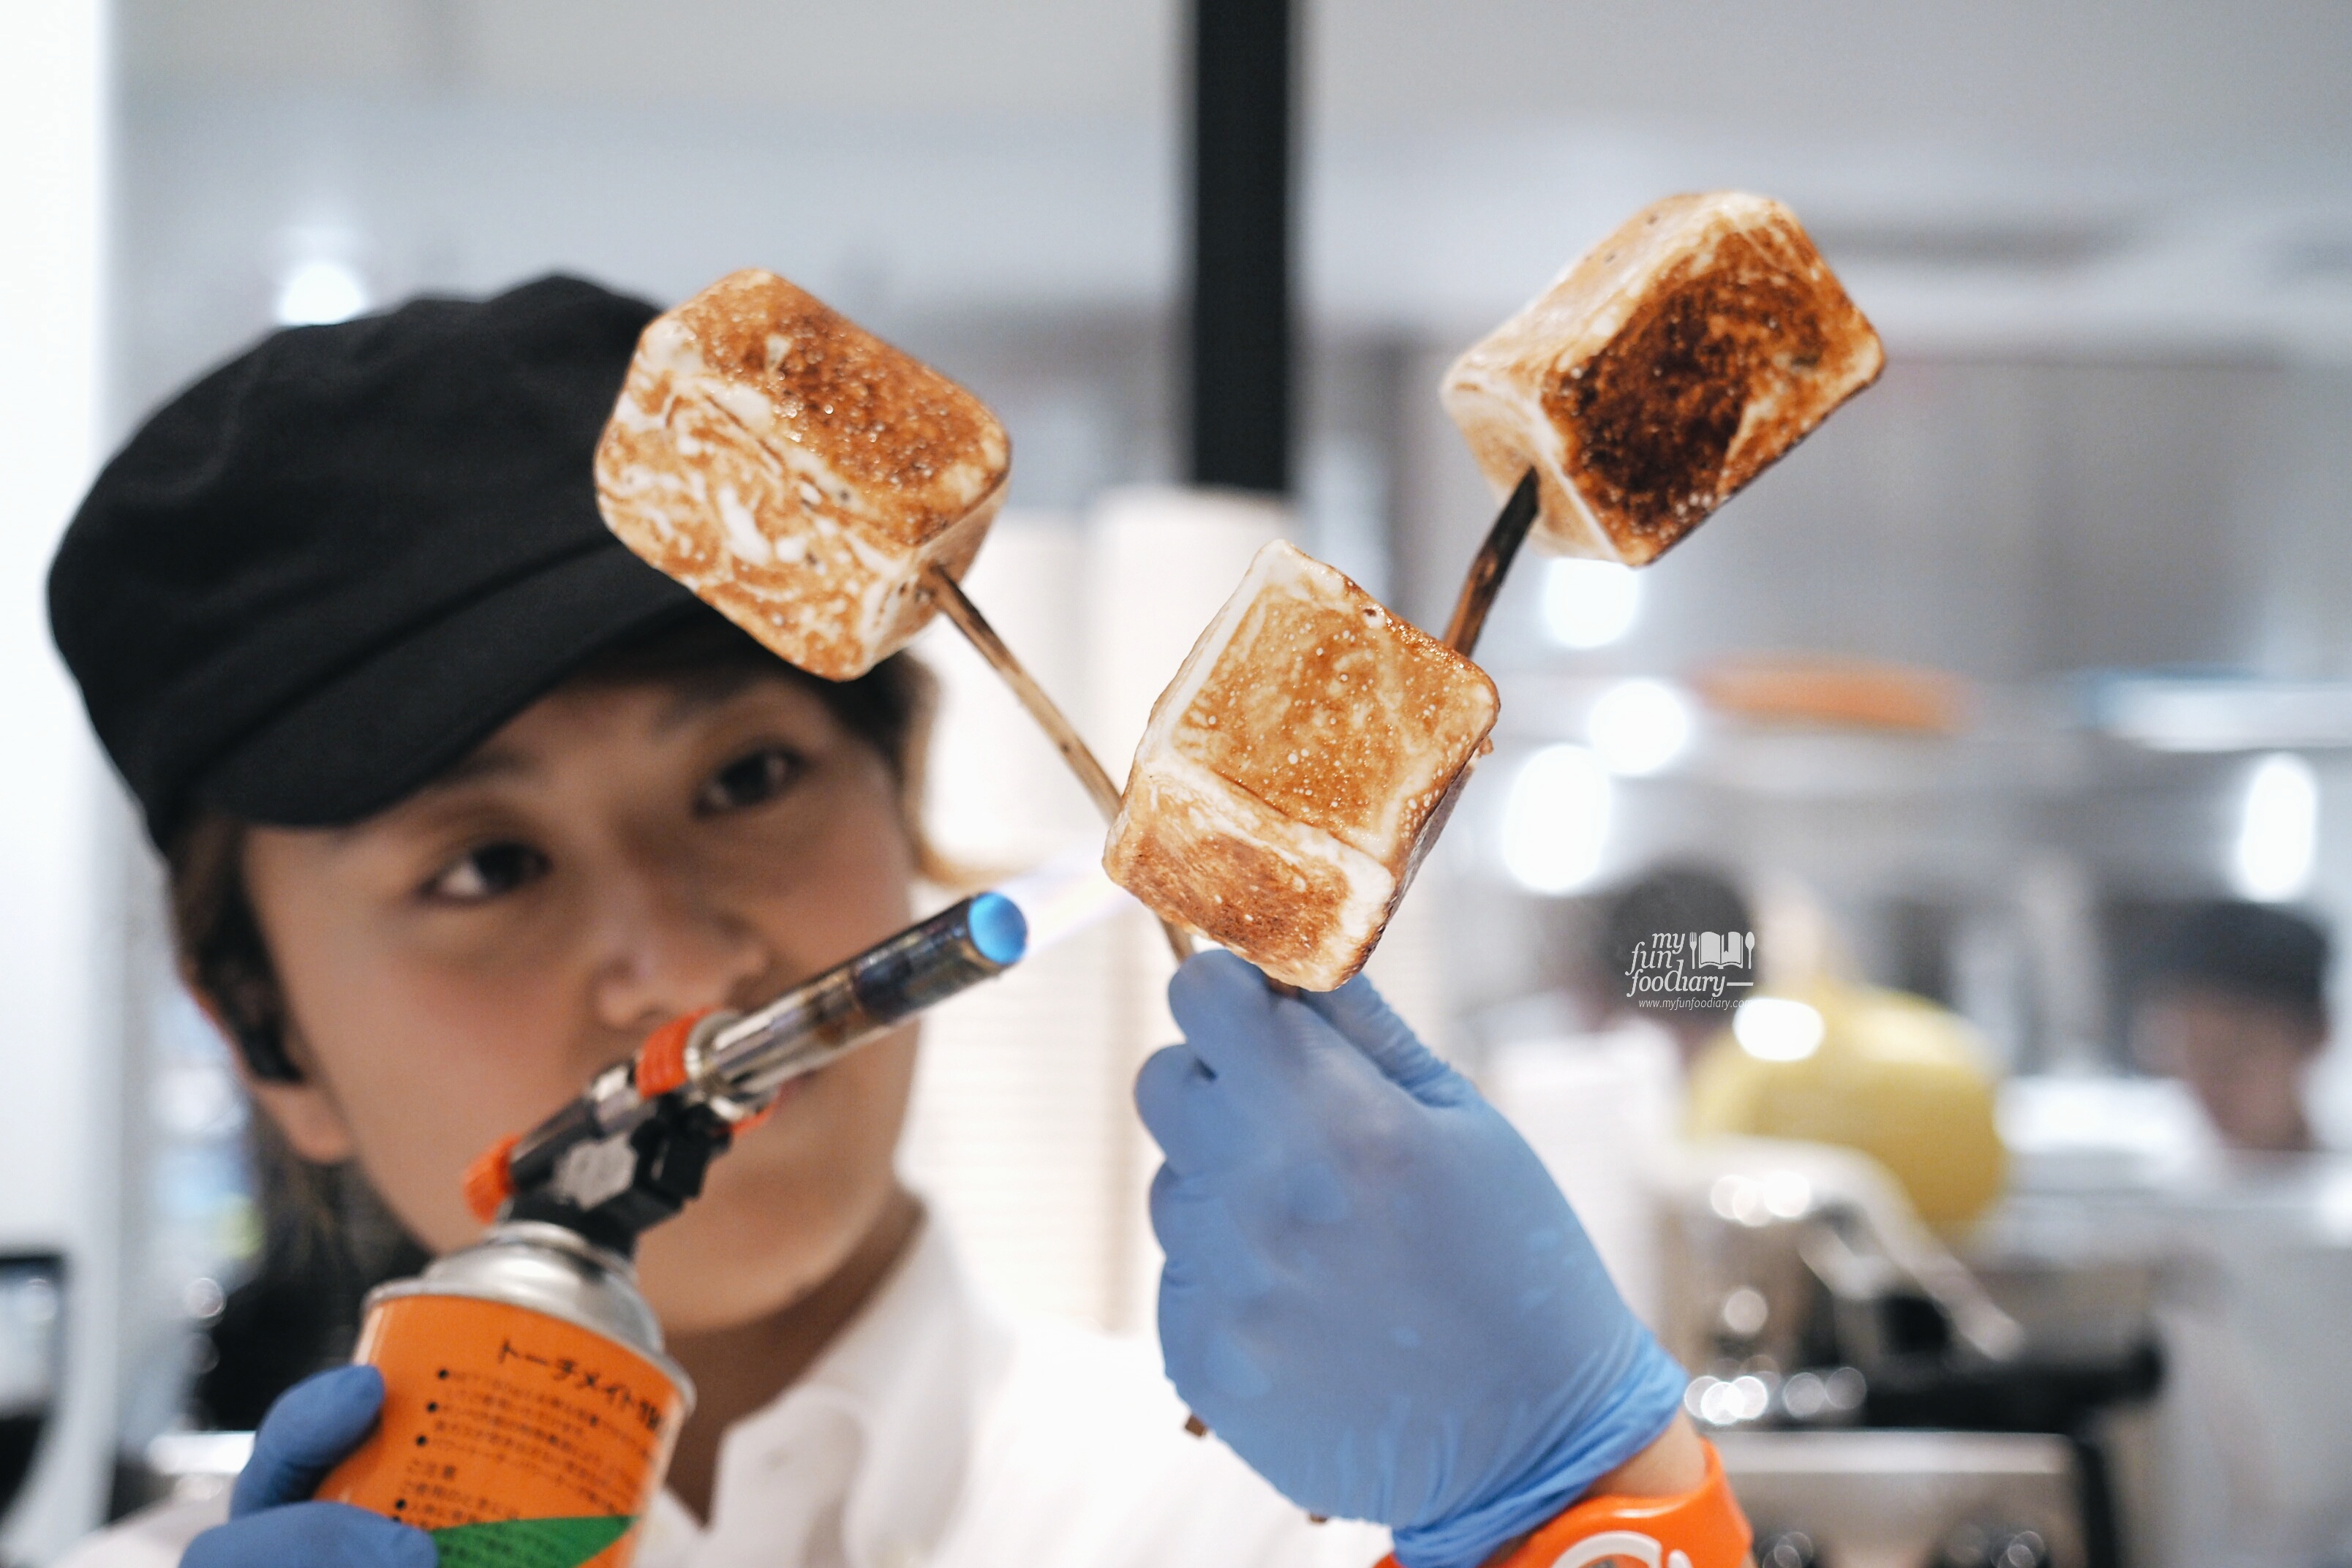 Frozen Smores torched process at DAB Tokyo by Myfunfoodiary